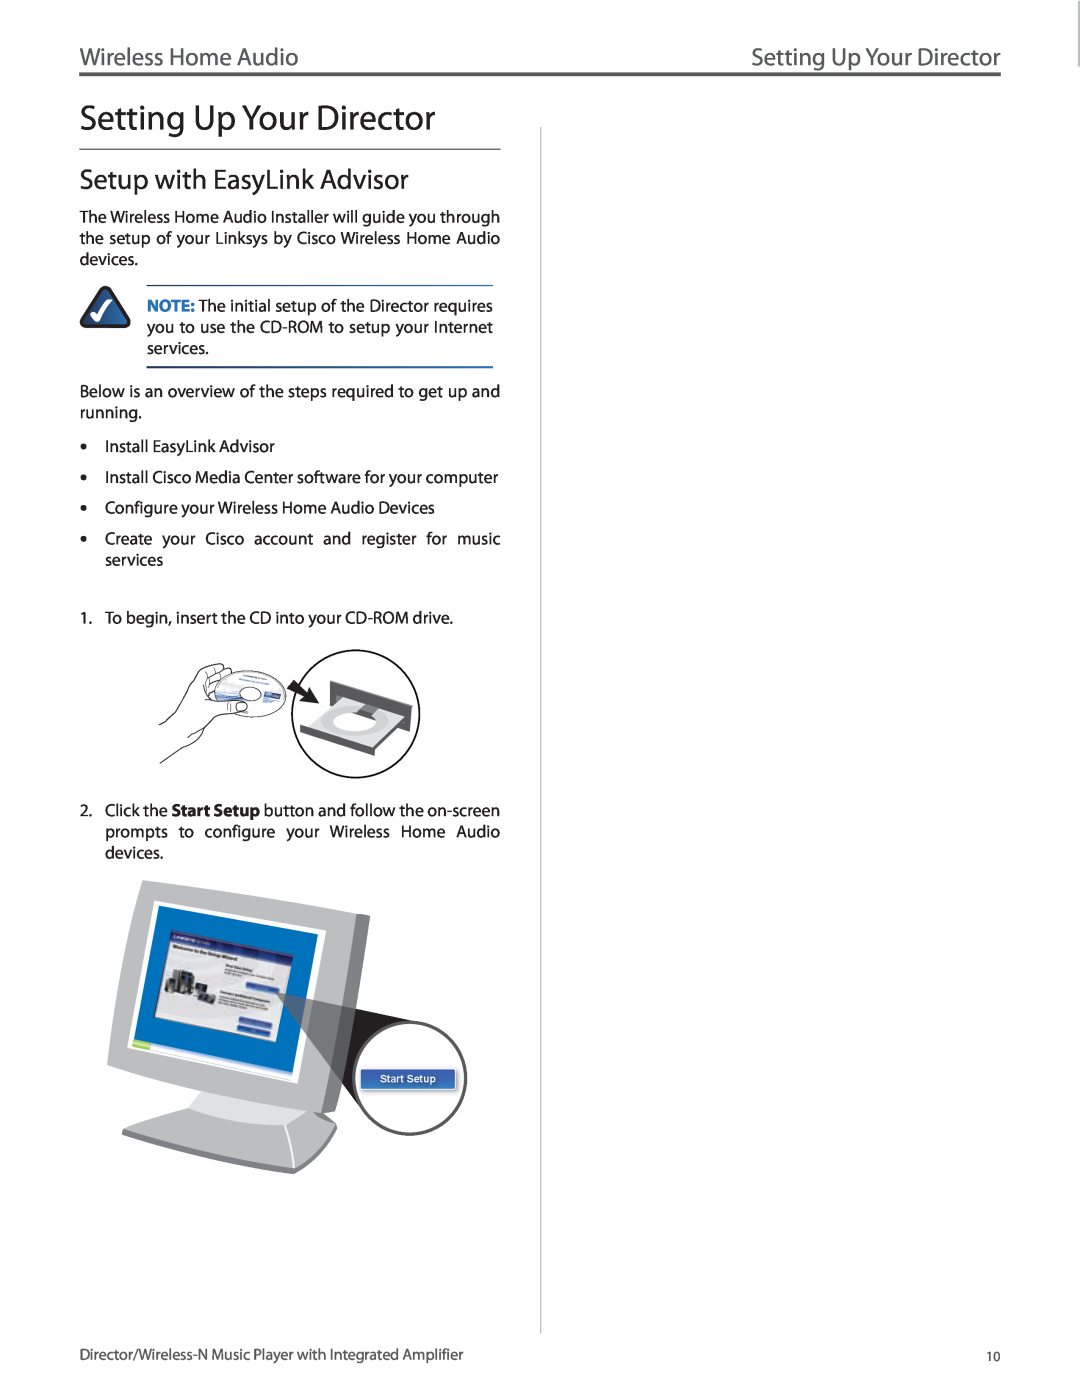 Linksys DMC250 manual Setting Up Your Director, Setup with EasyLink Advisor, Wireless Home Audio 